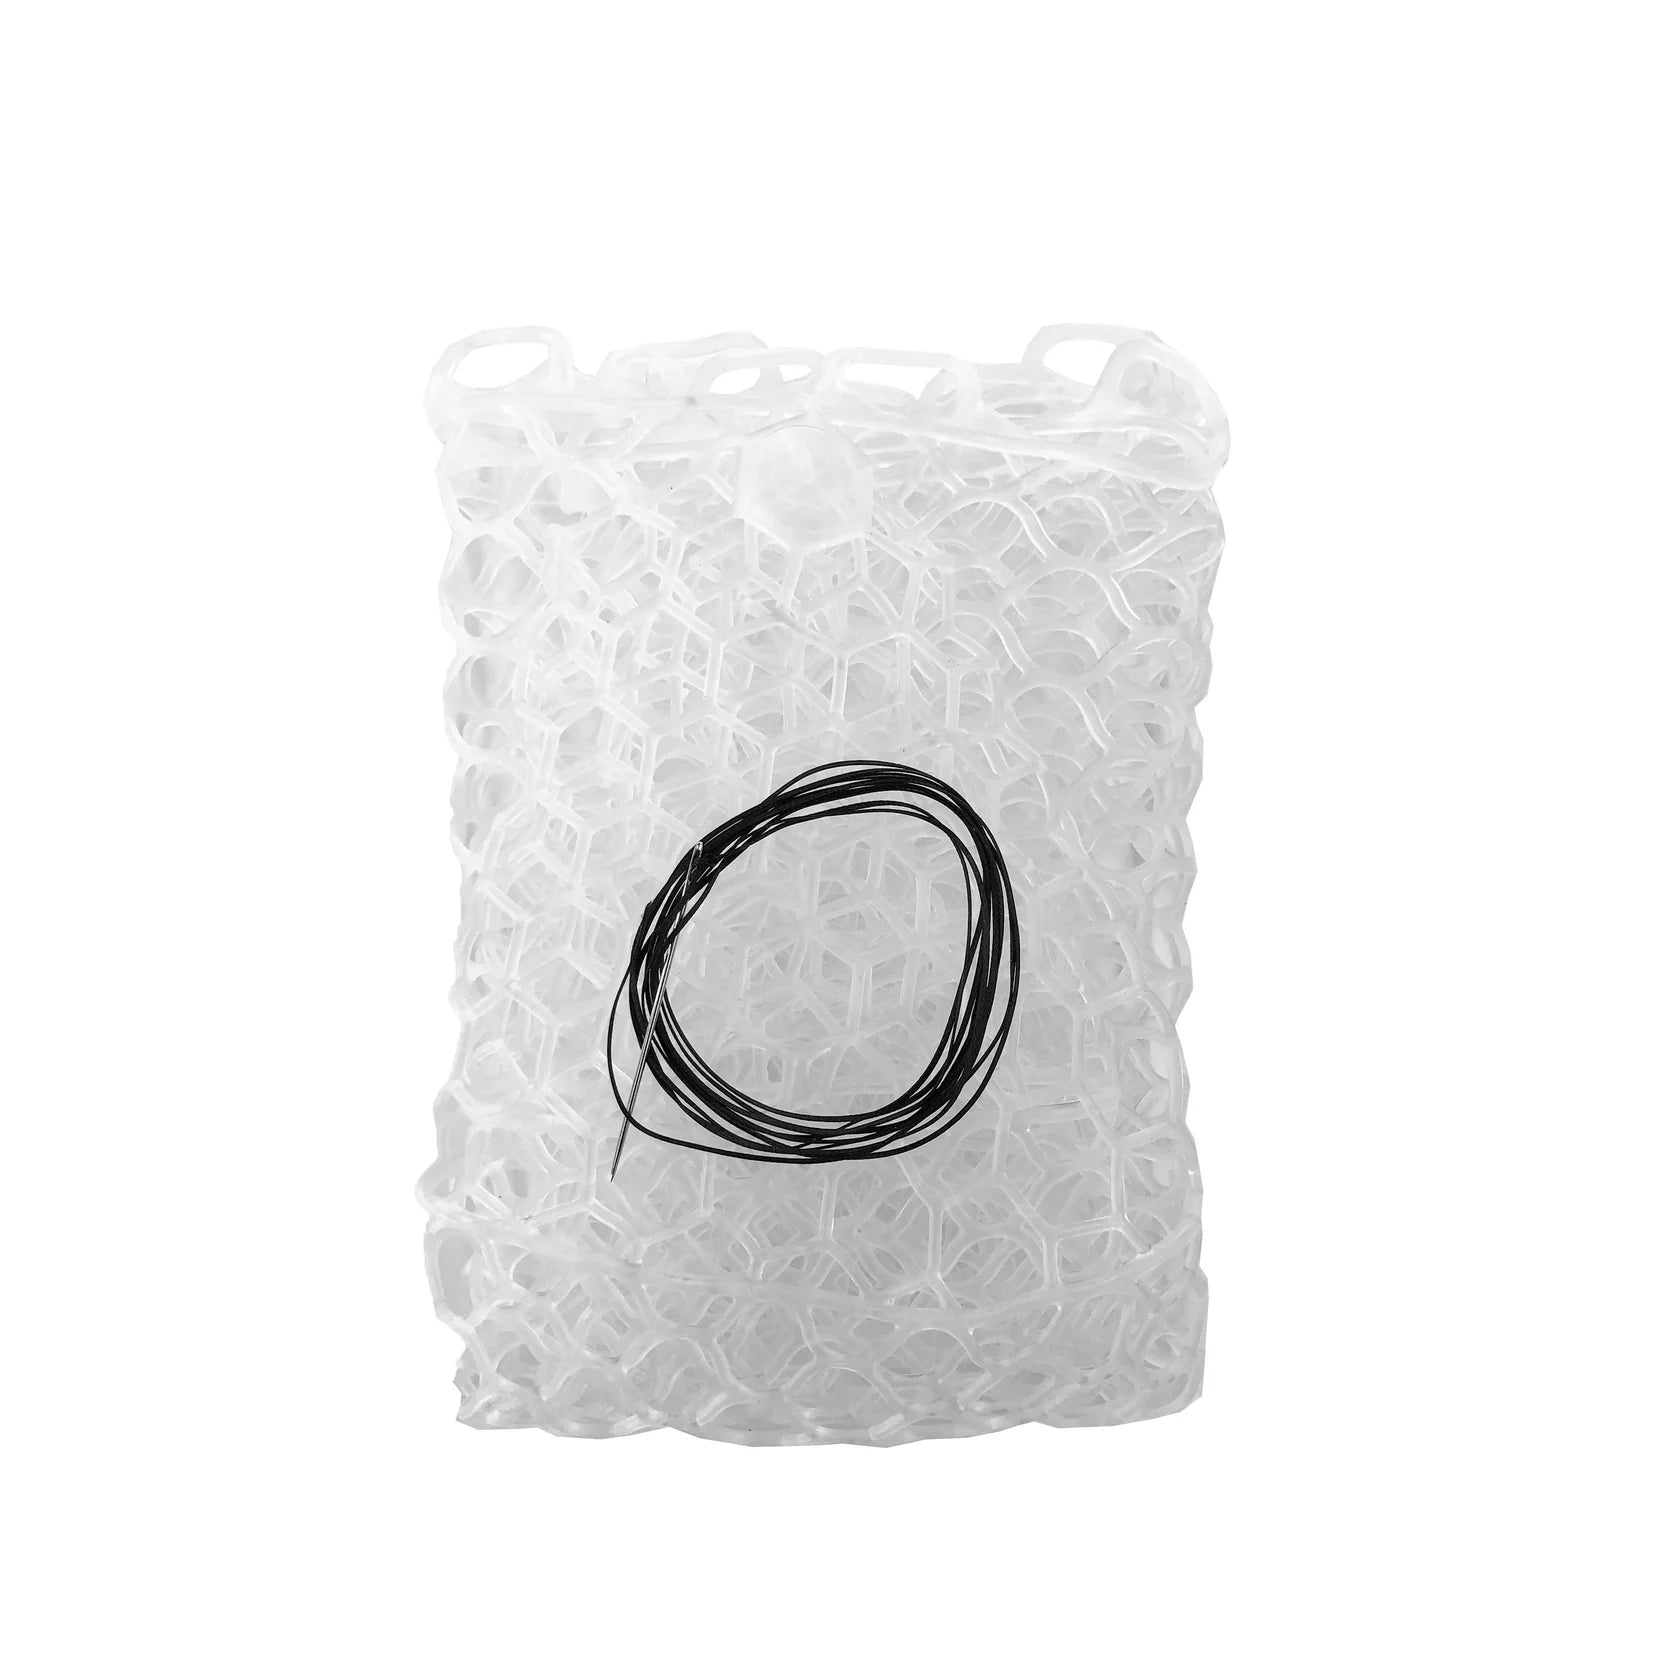 Fishpond Nomad Net Replacement 15"